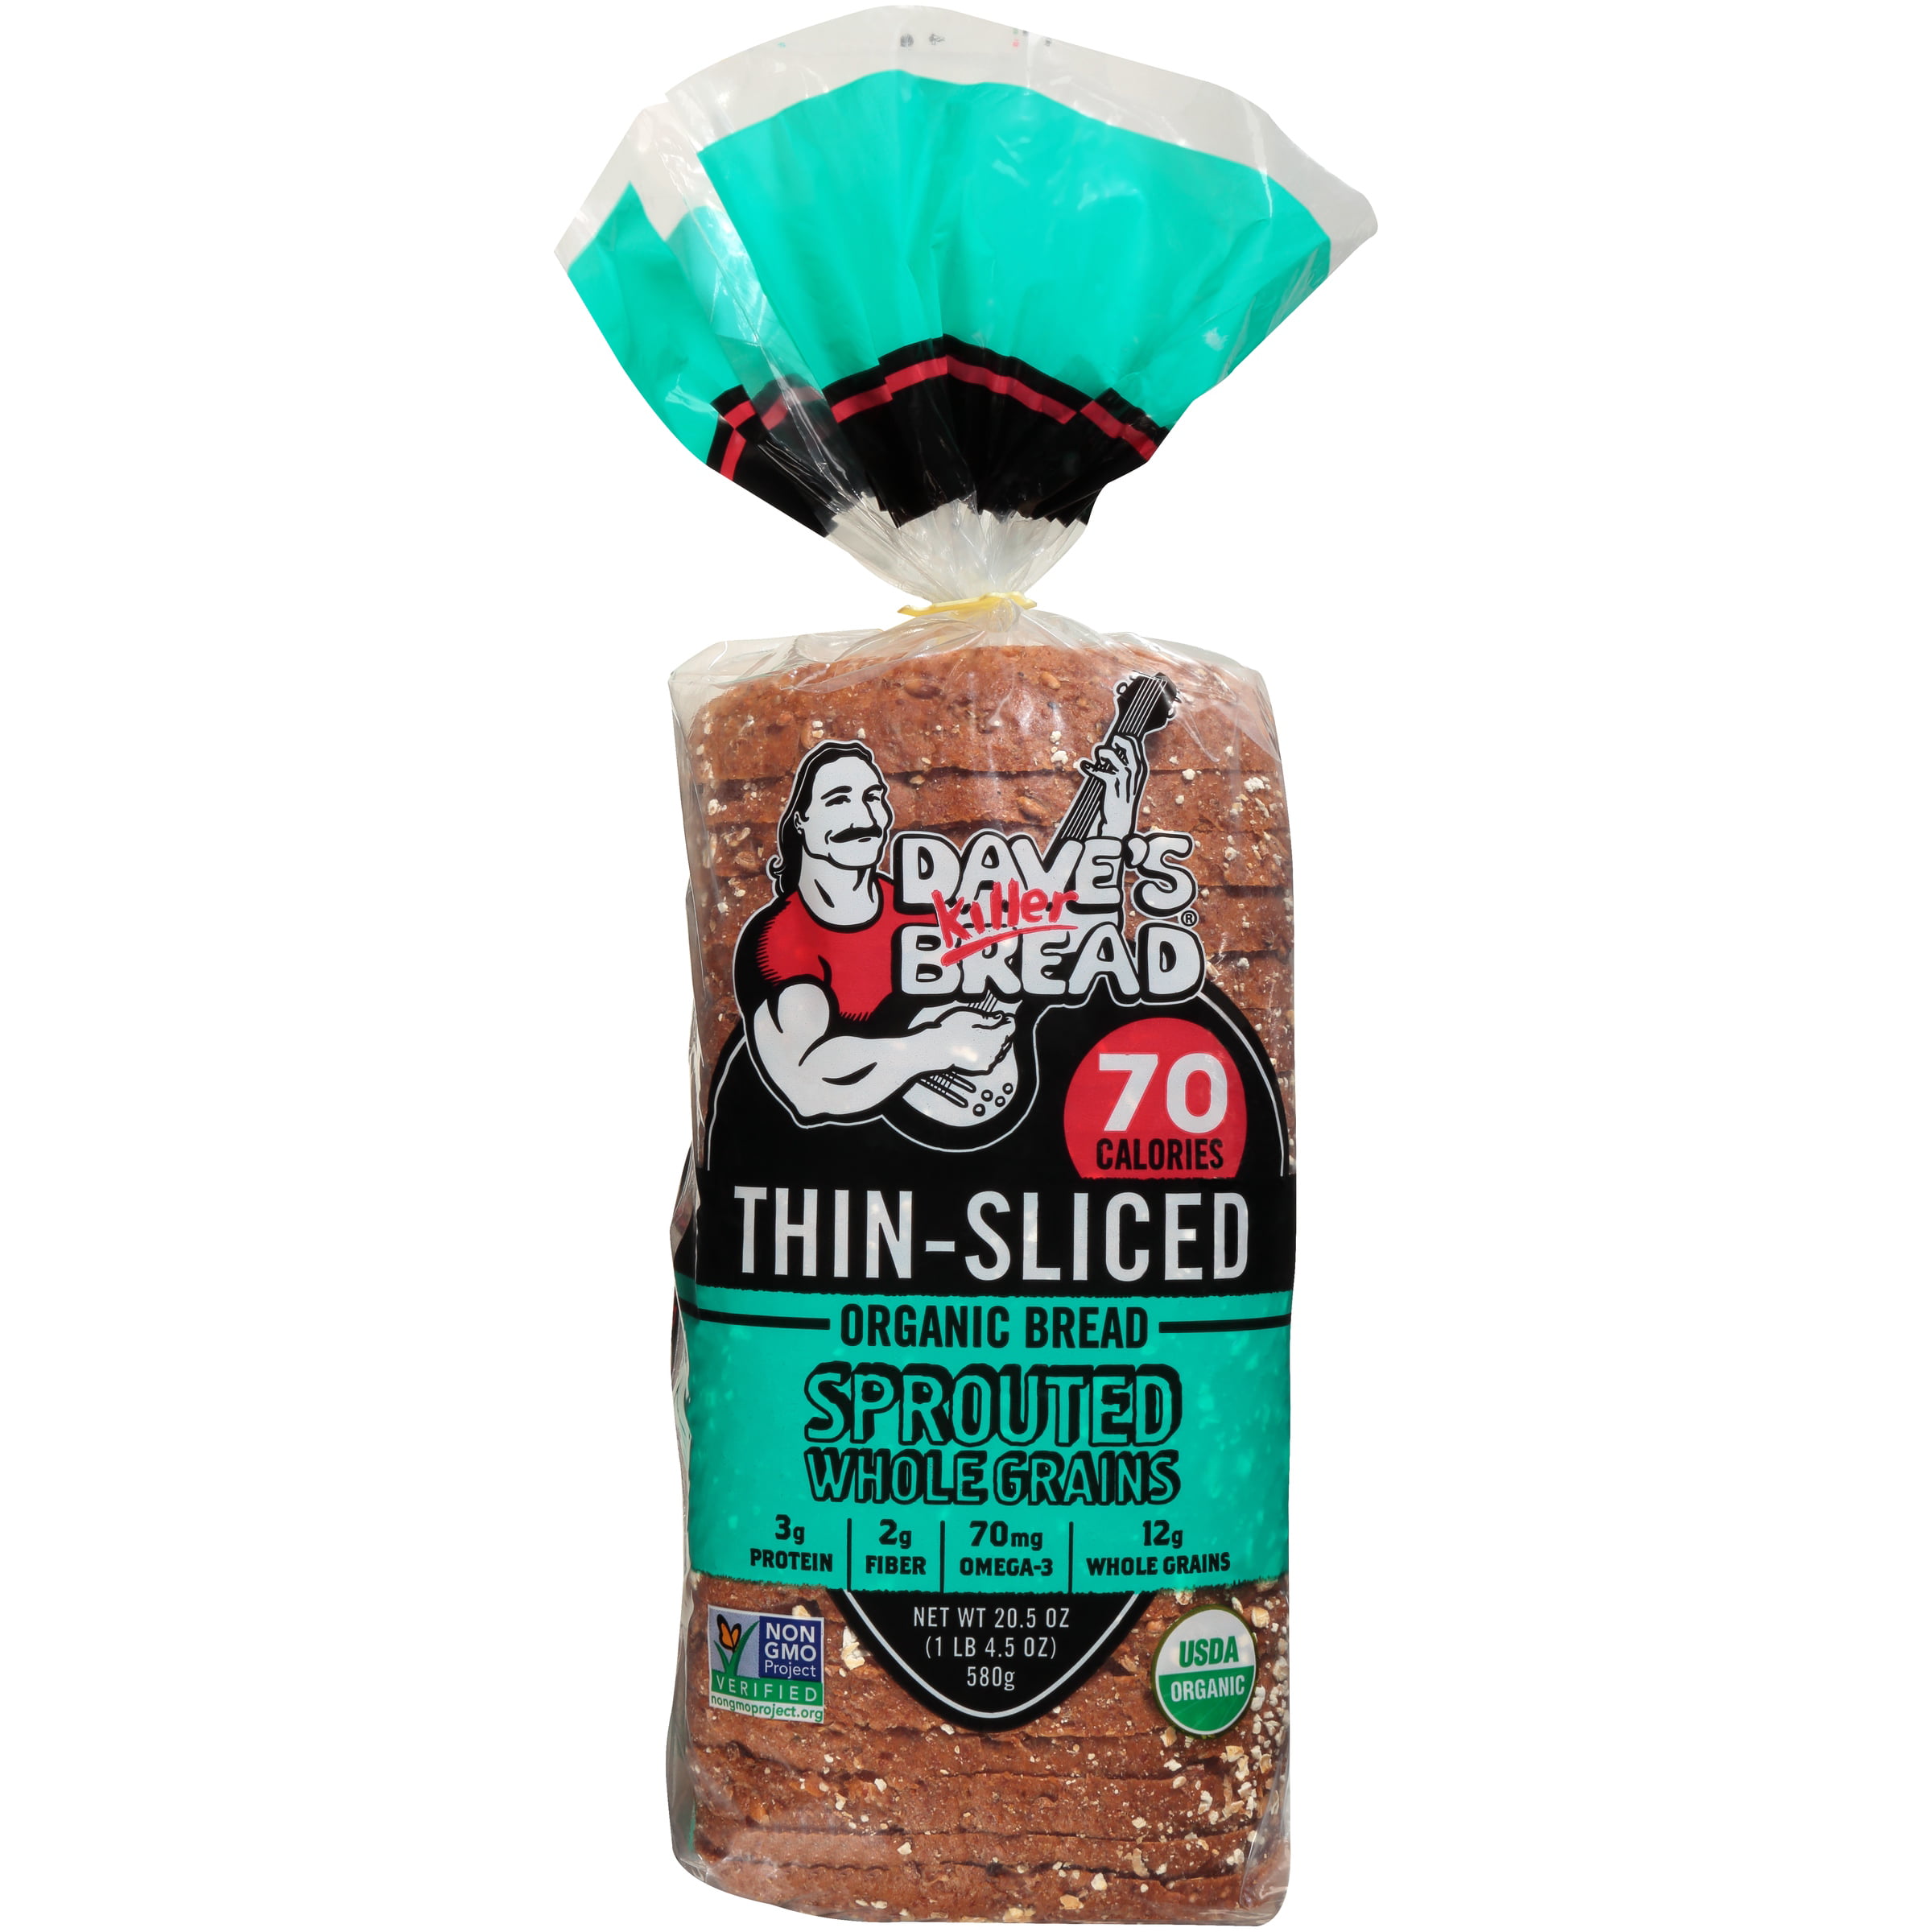 dave-s-killer-bread-sprouted-whole-grains-thin-sliced-organic-bread-25